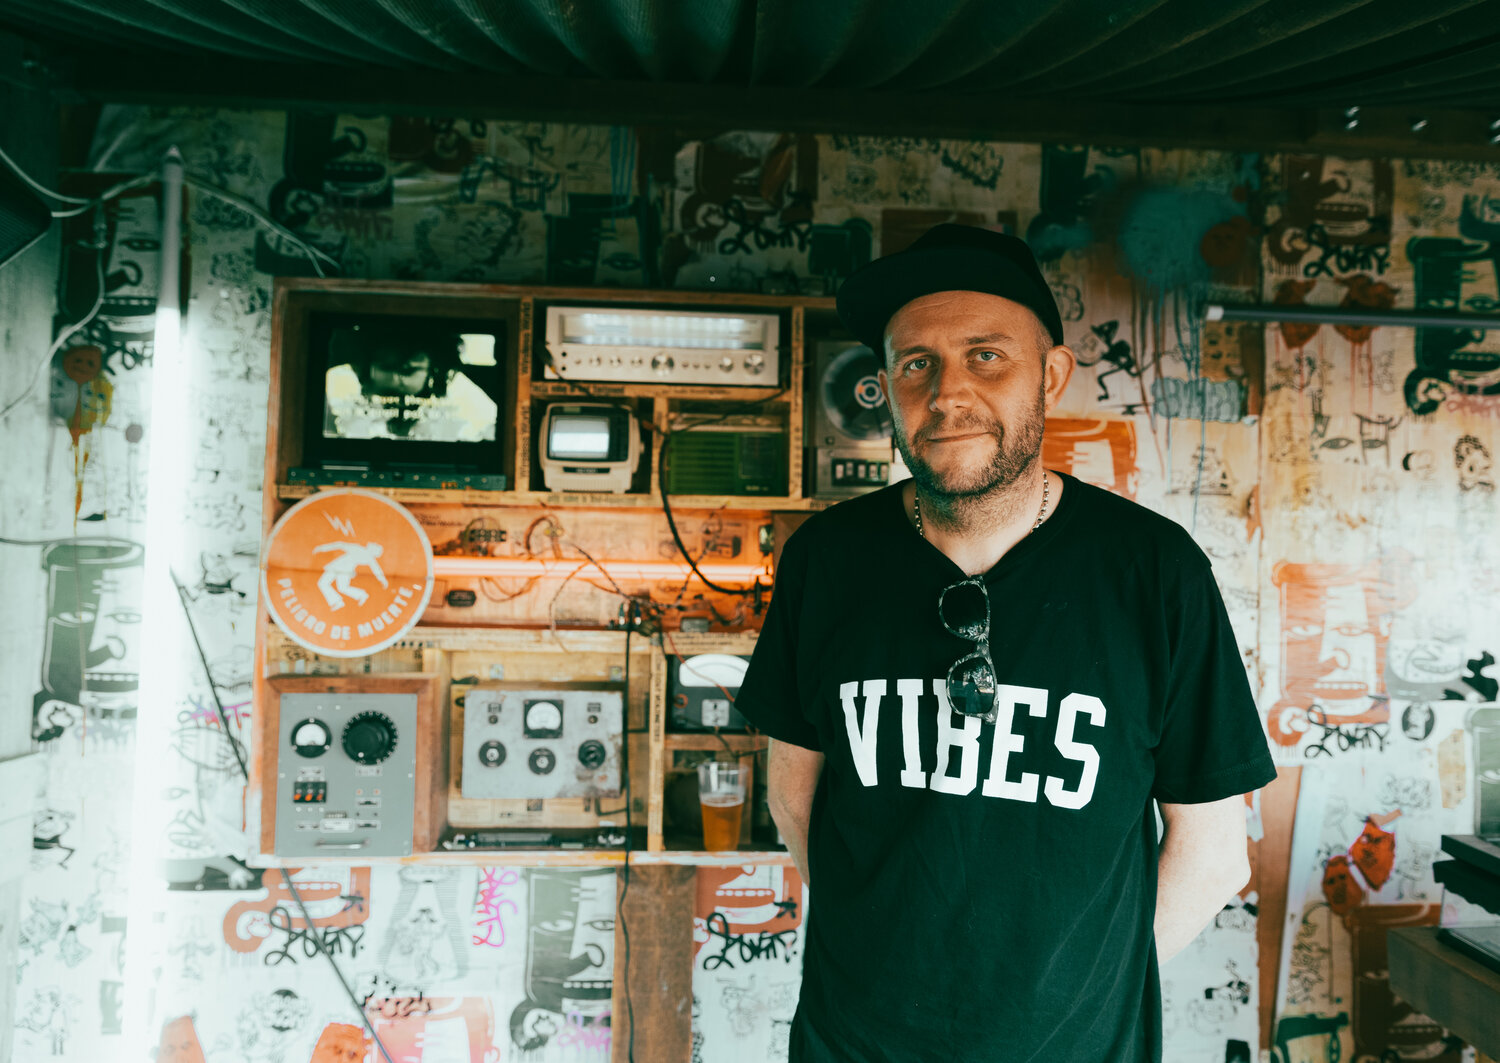 Ep 20 - Director of Photography Arlen Figgis talks the birth of Drum and Bass, filming Gumball 3000 with Dirty Sanchez and creating his music festival stage, The Shack